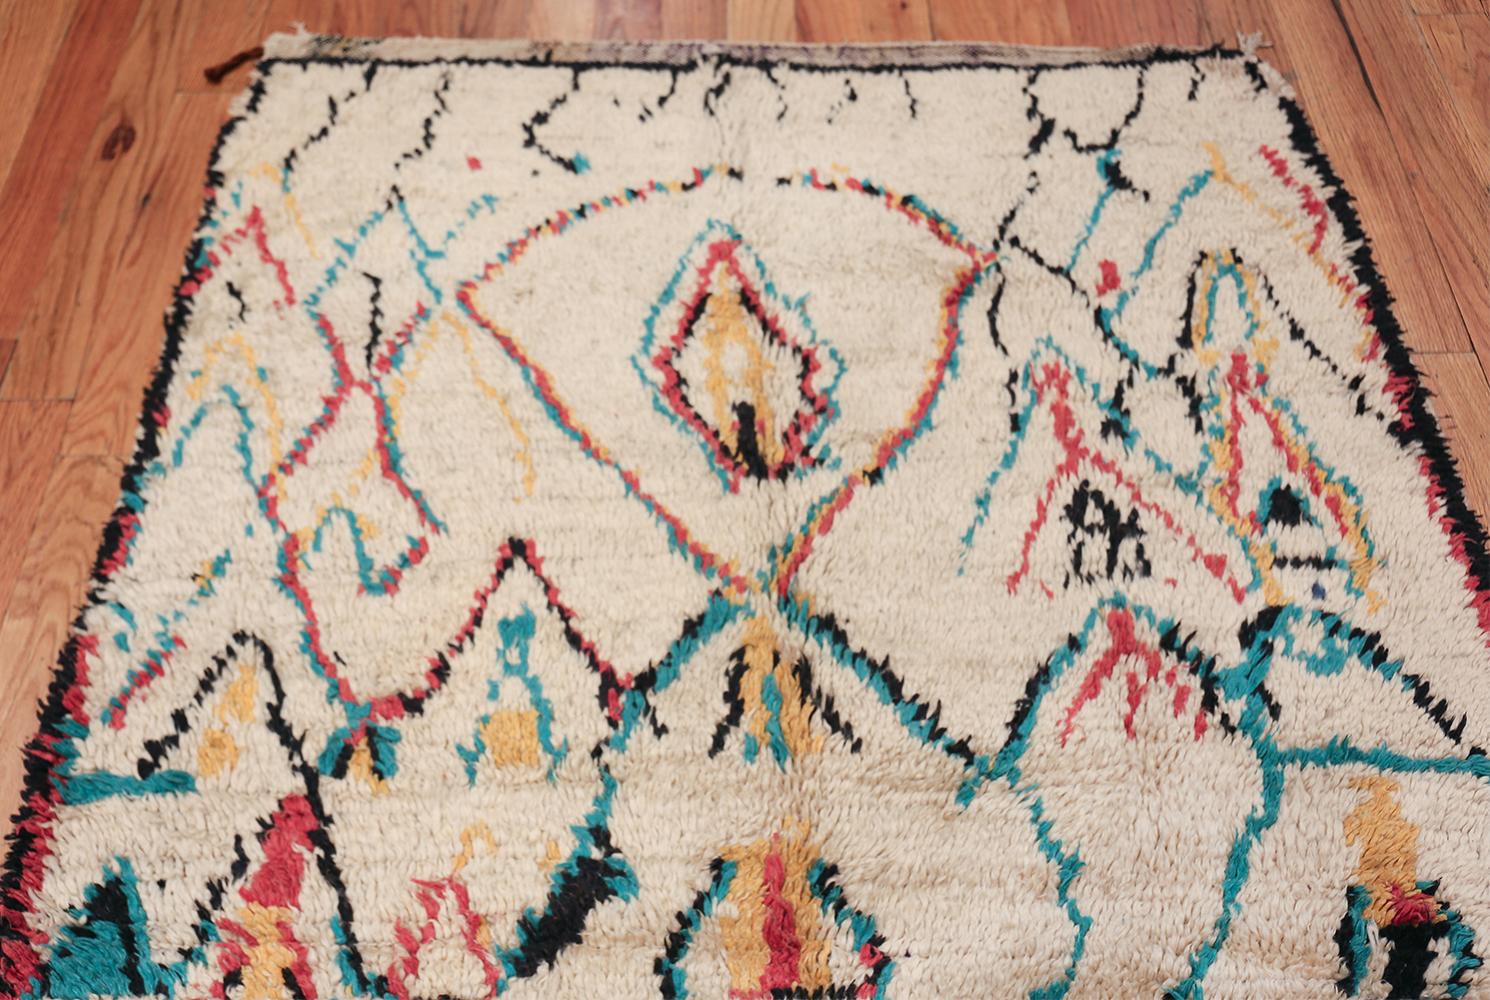 20th Century Colorful Small Size Vintage Moroccan Rug. Size: 4 ft 2 in x 7 ft